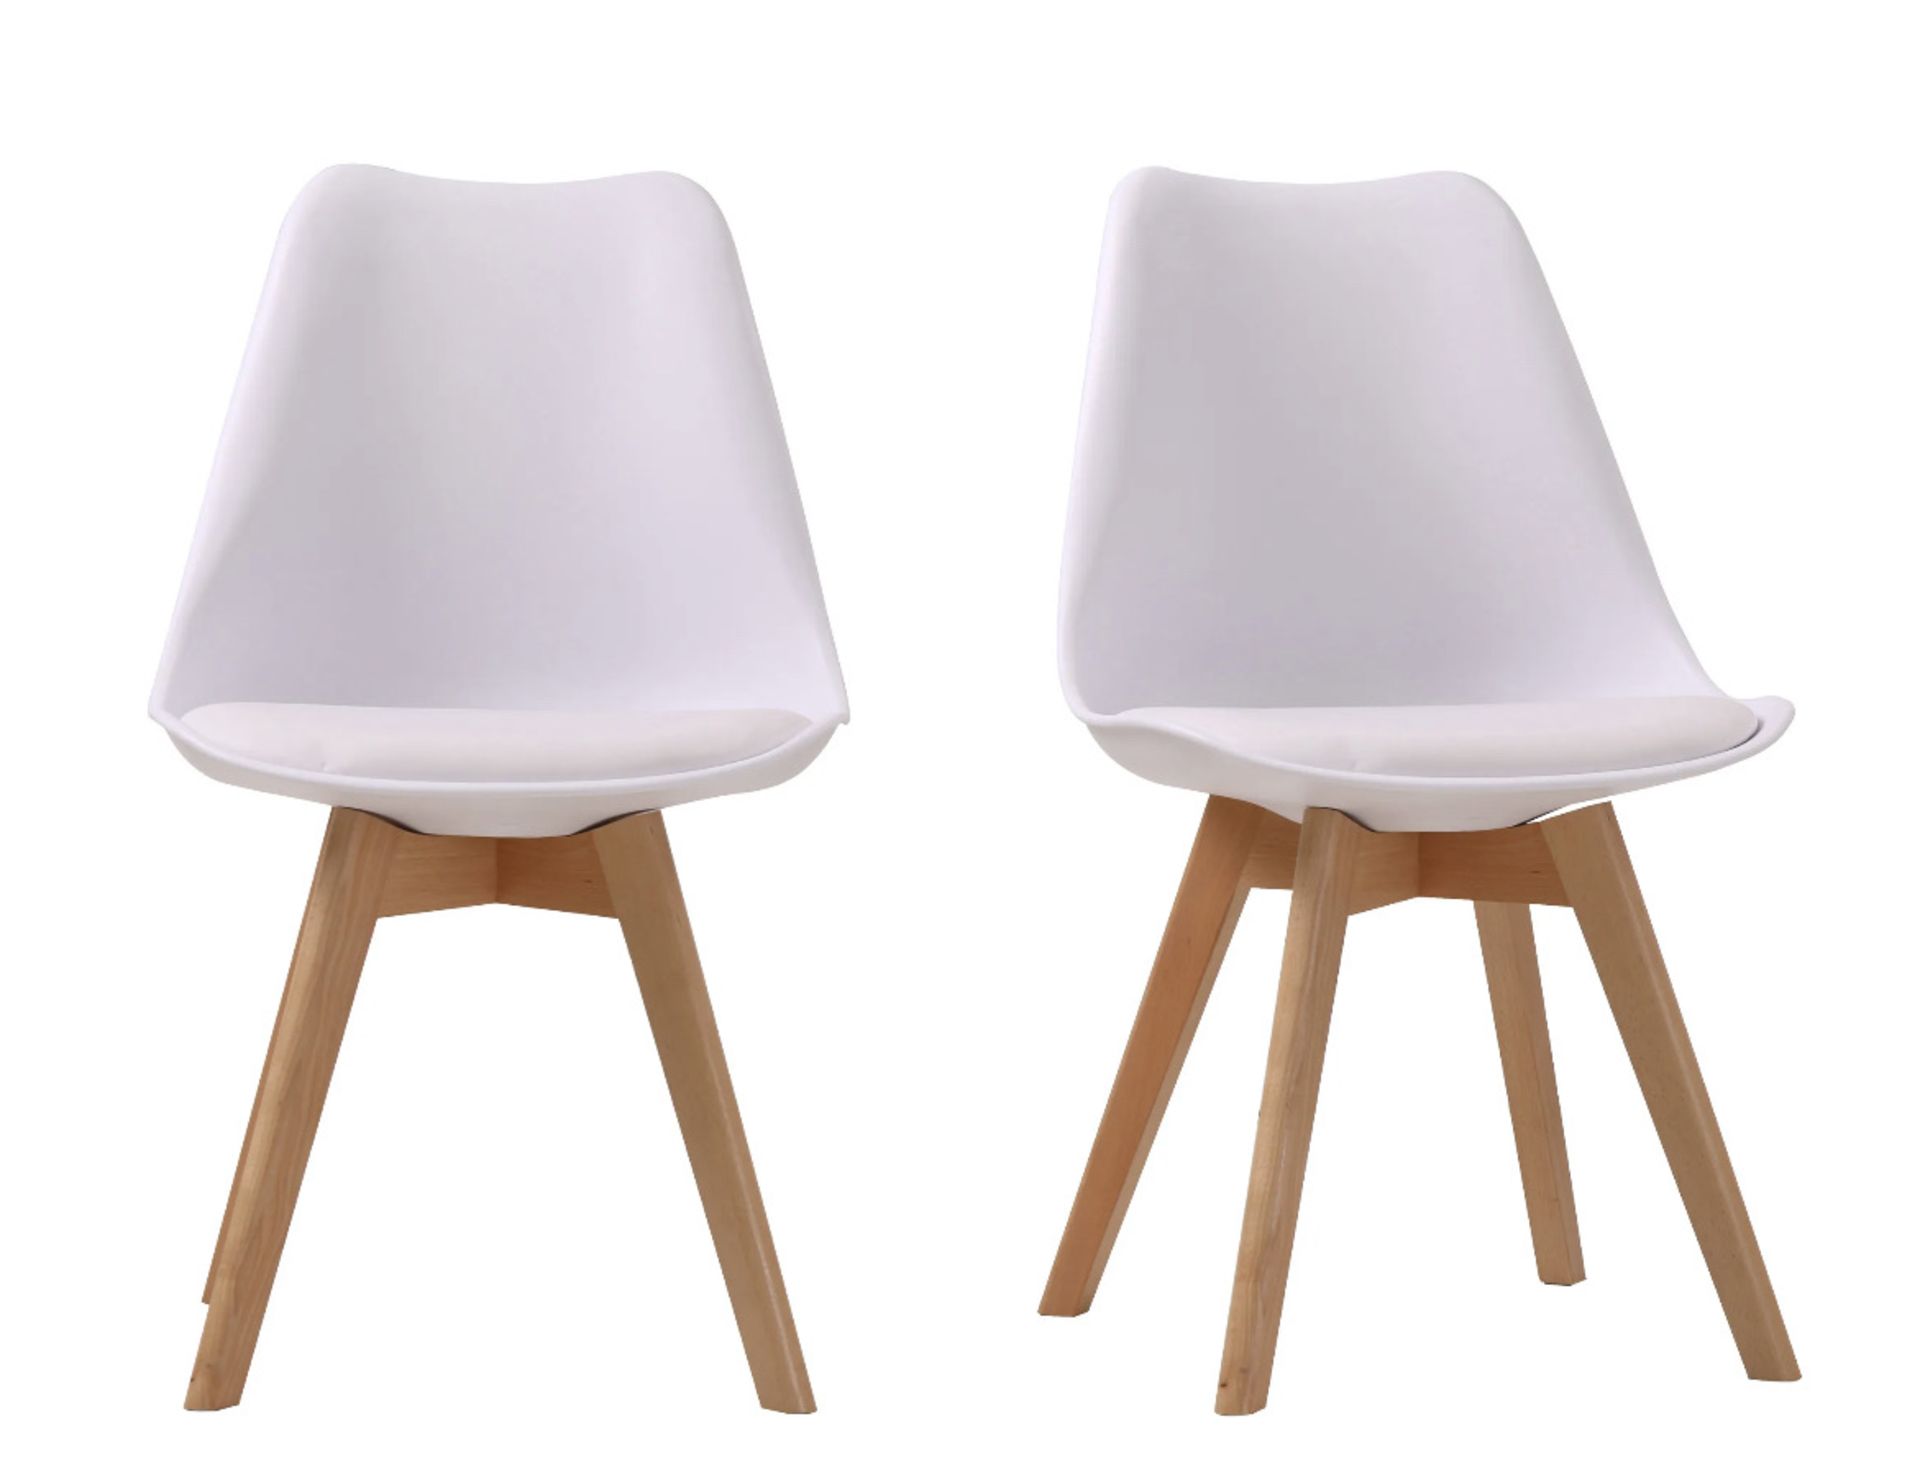 LOUVRE PAIR OF PADDED DINING CHAIRS
IN WHITE - RRP £179 PER PAIR